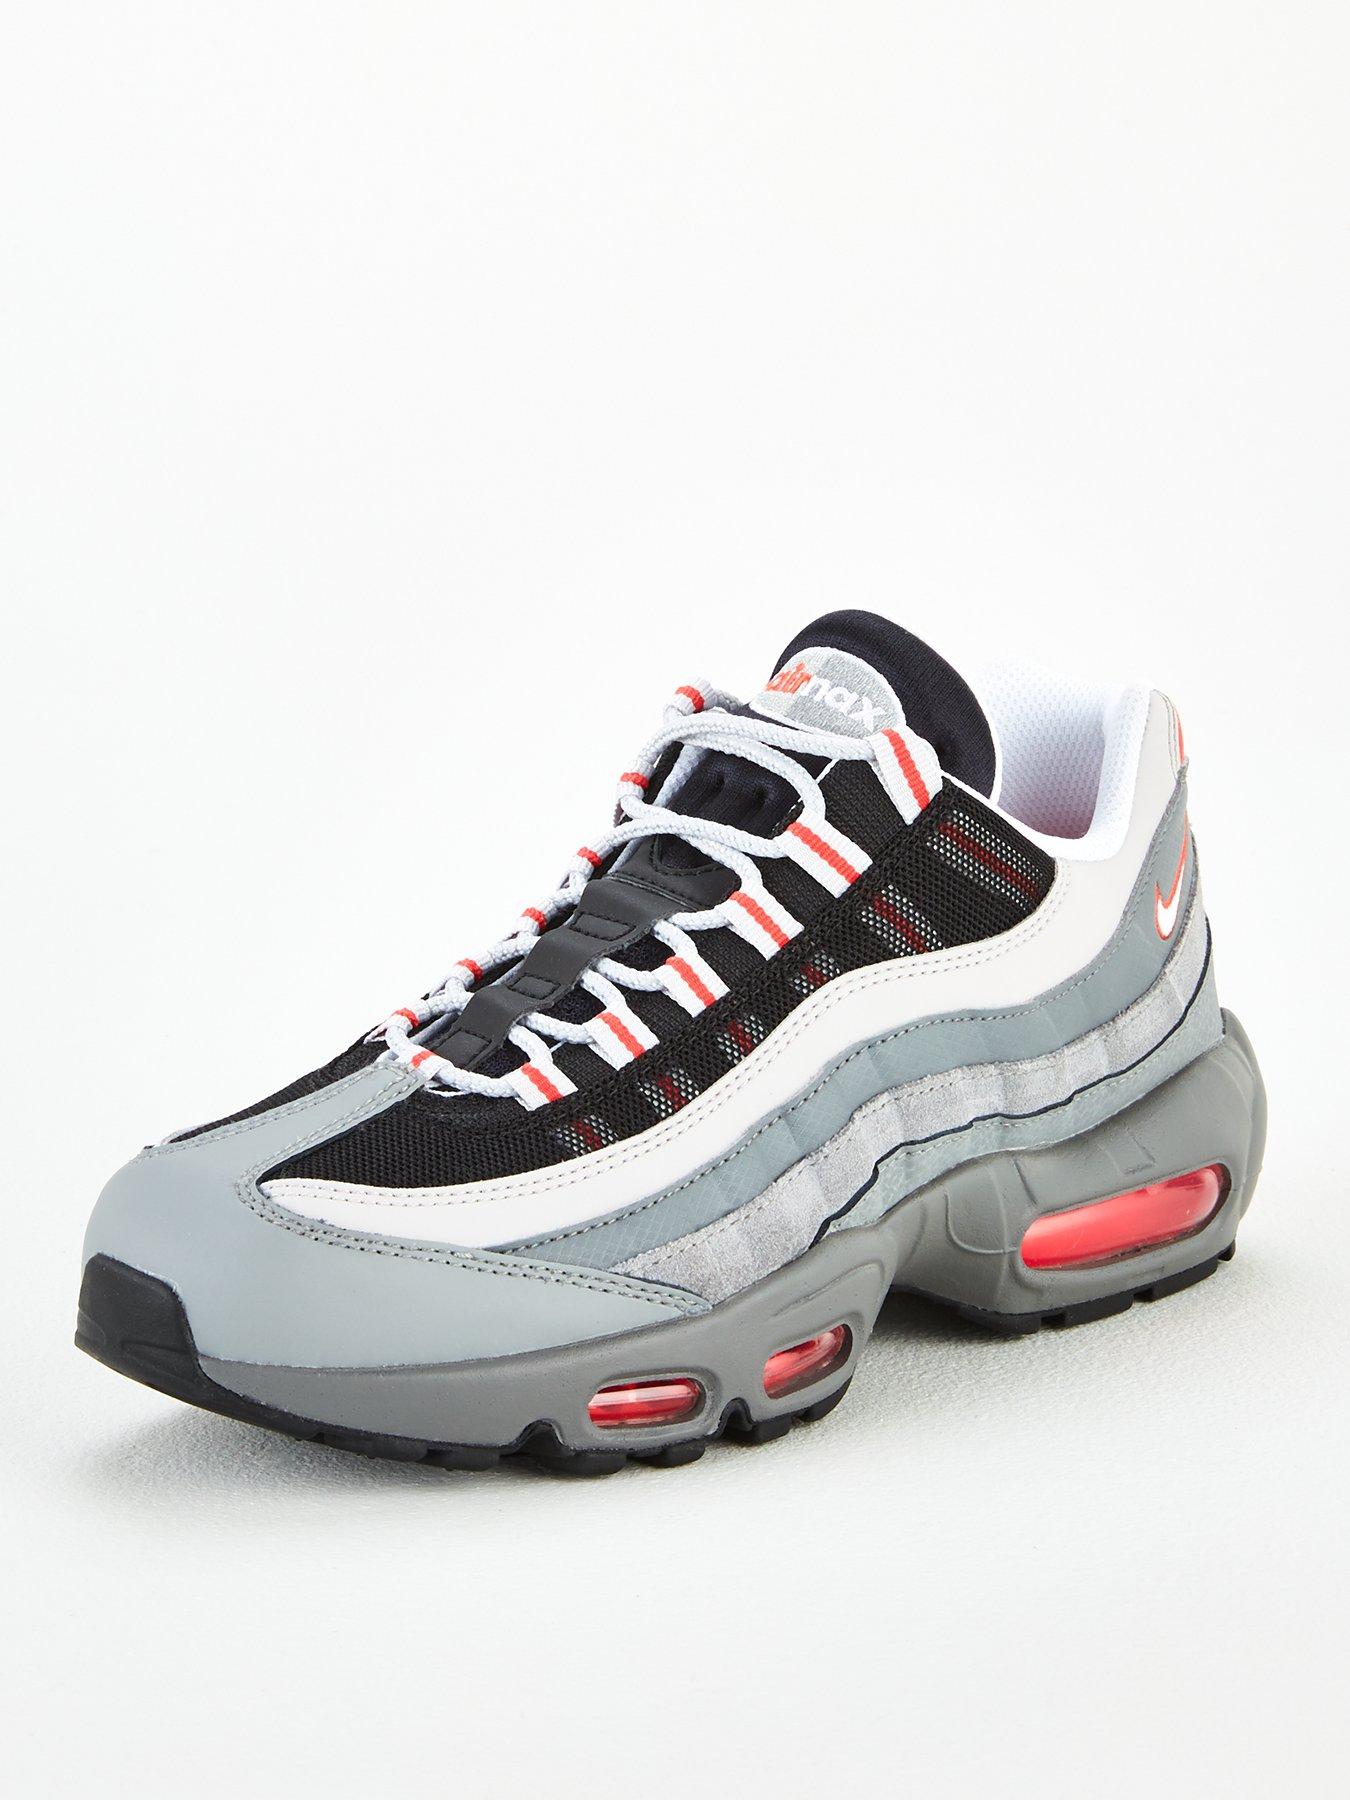 air max 95 red white grey